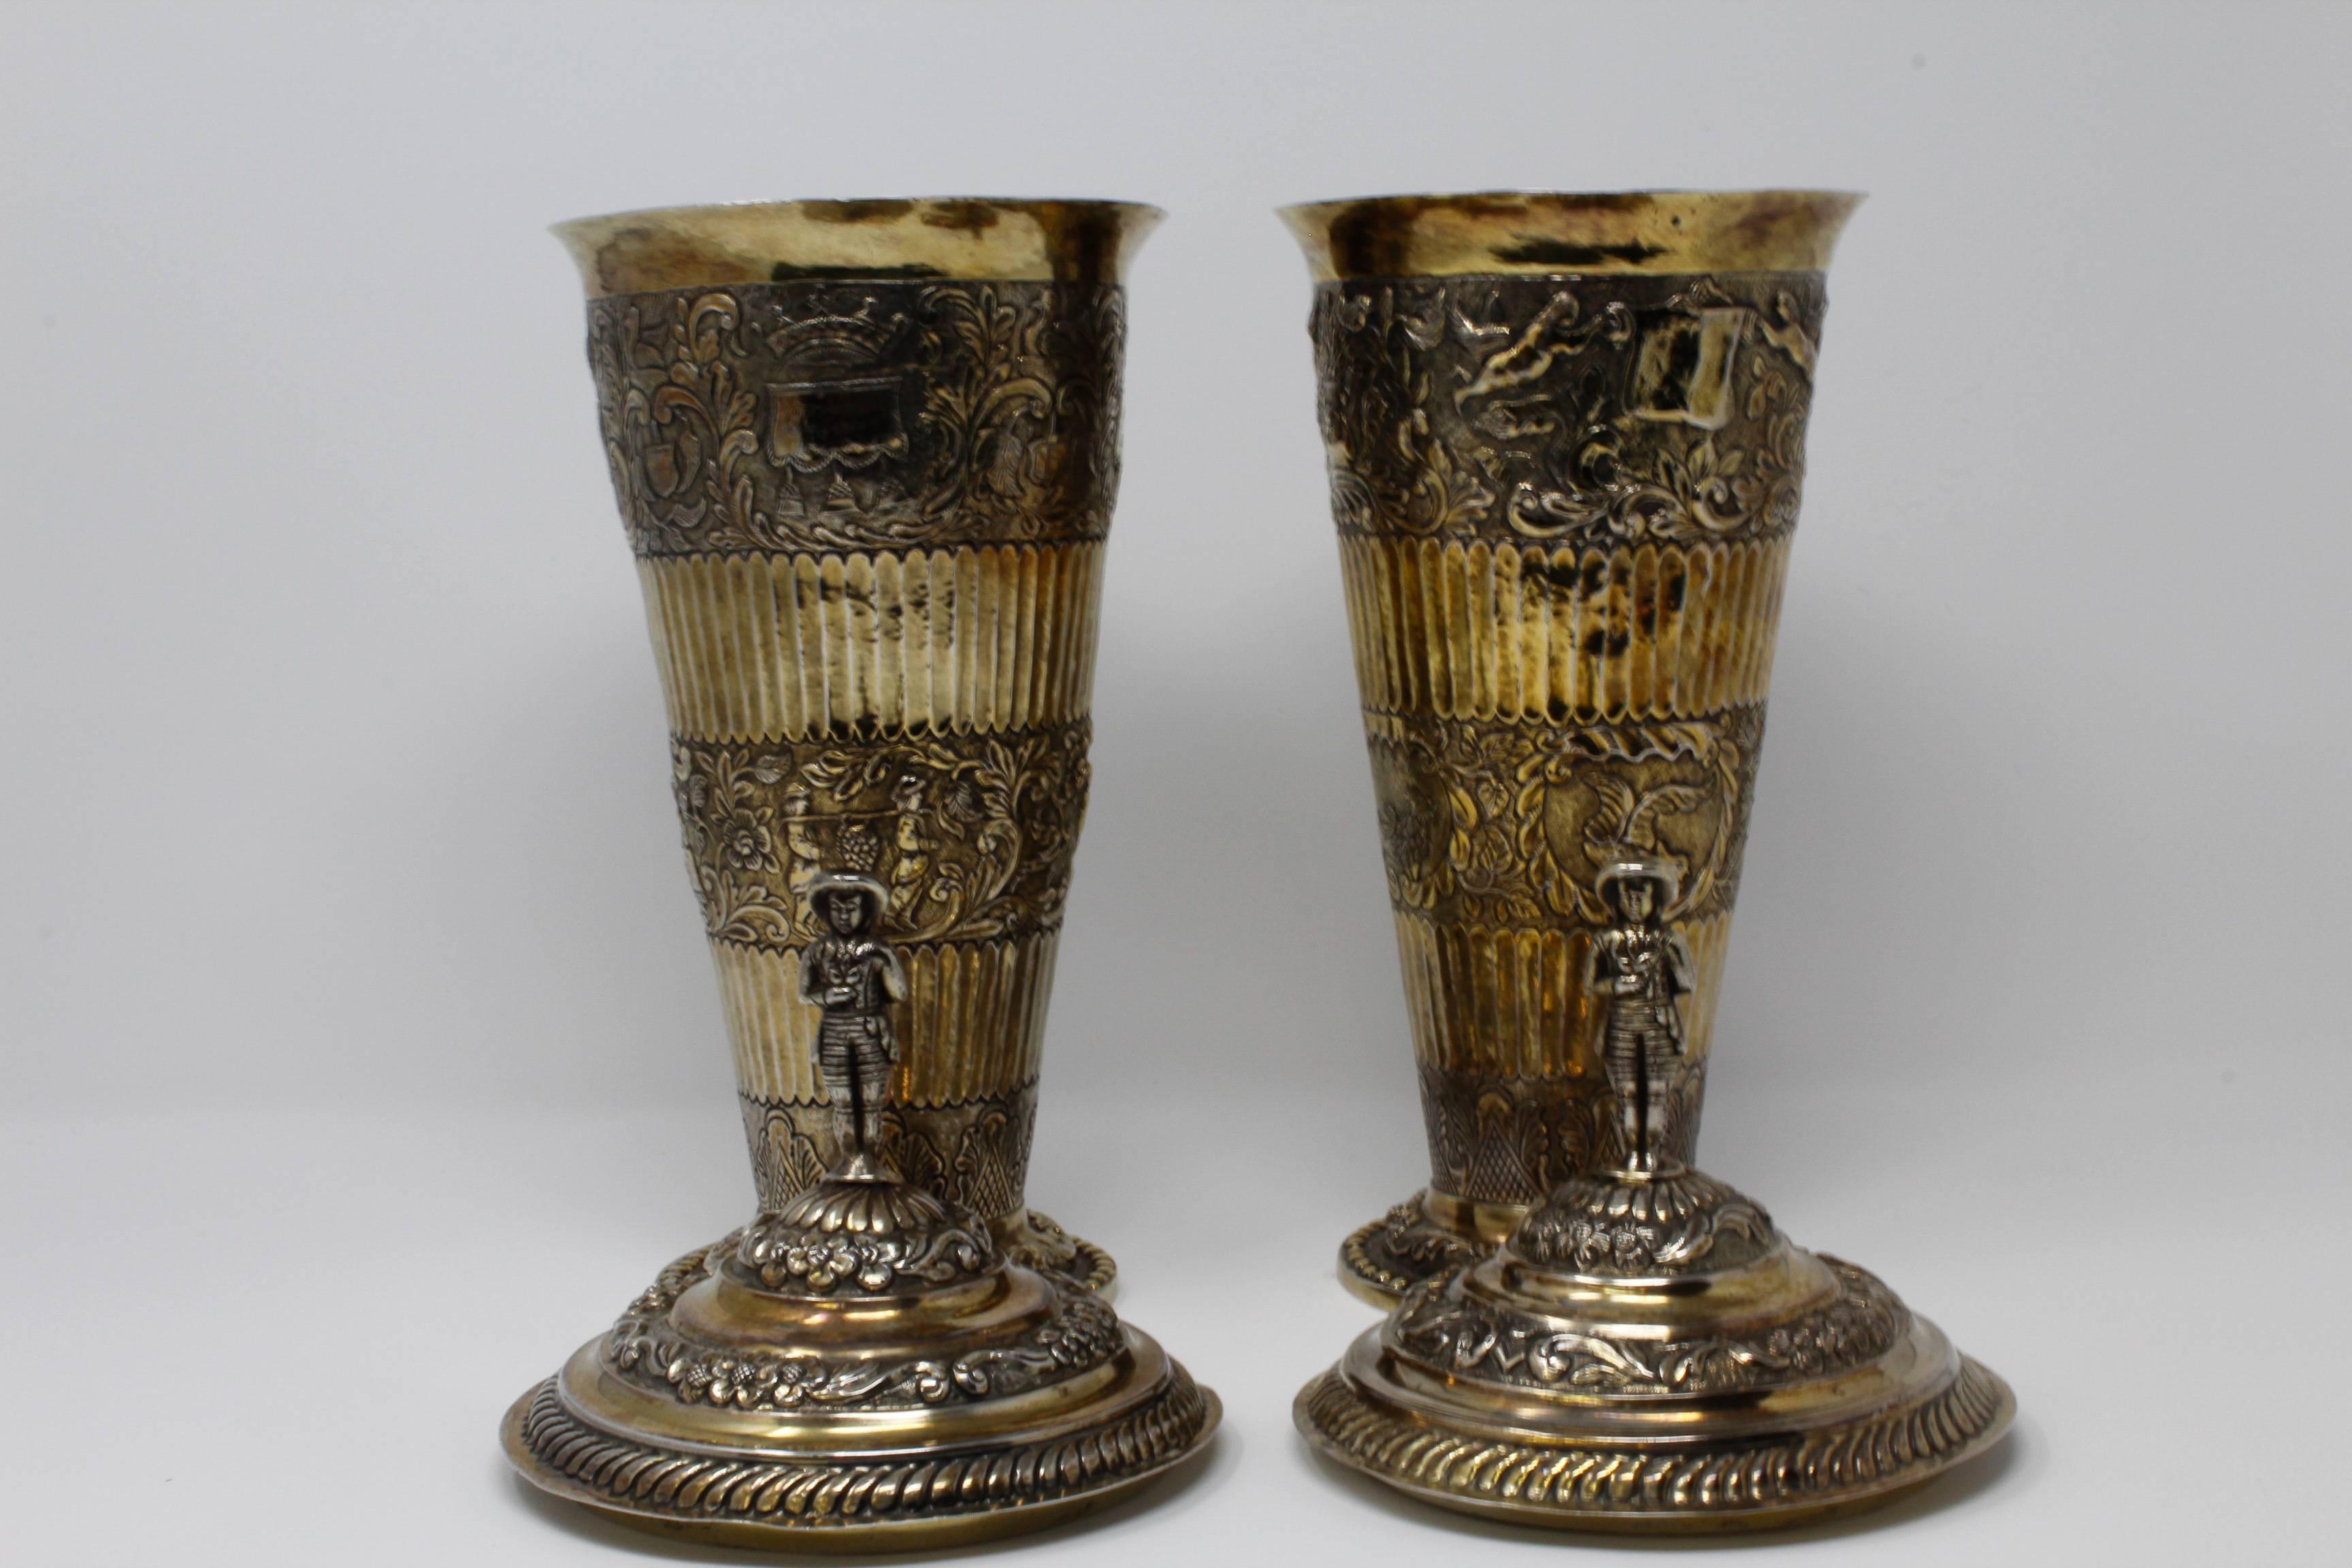 Revival Covered Vases with Removable Lids, Gilt Silver, German in 17th Century Style For Sale